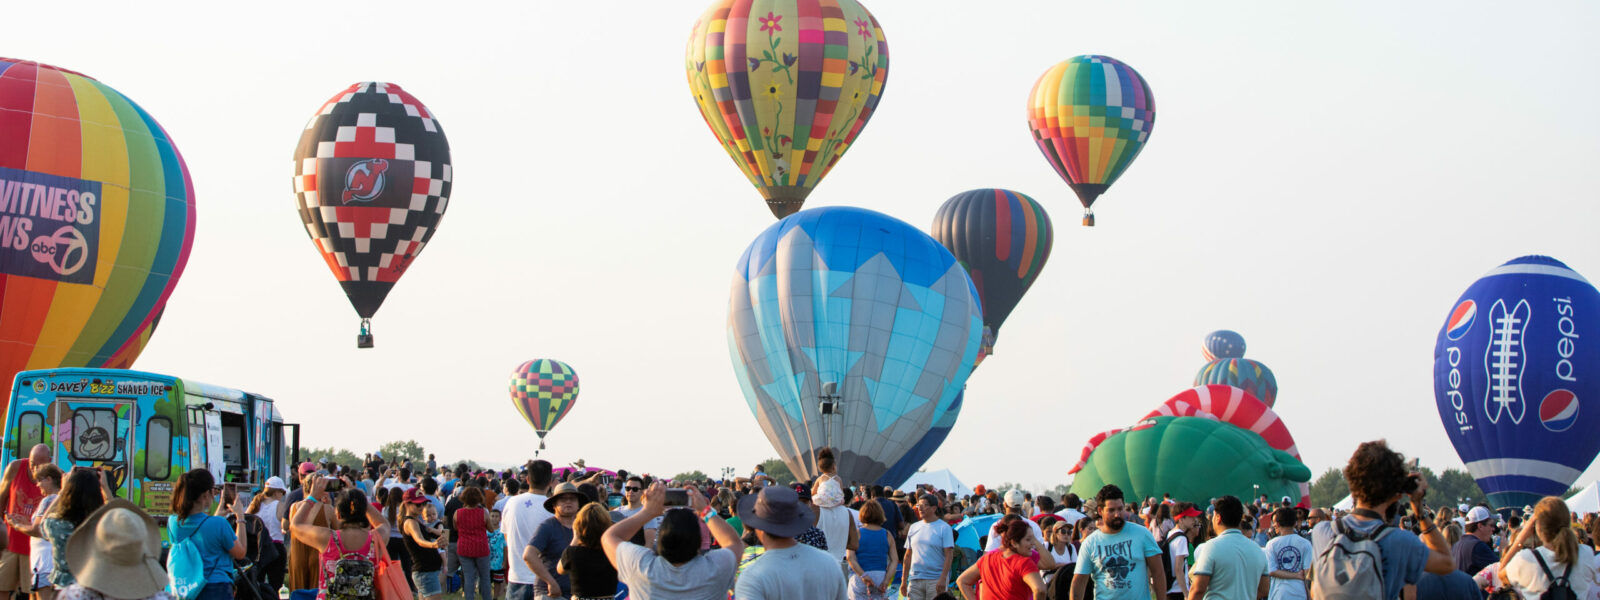 General Admission New Jersey Lottery Festival of Ballooning